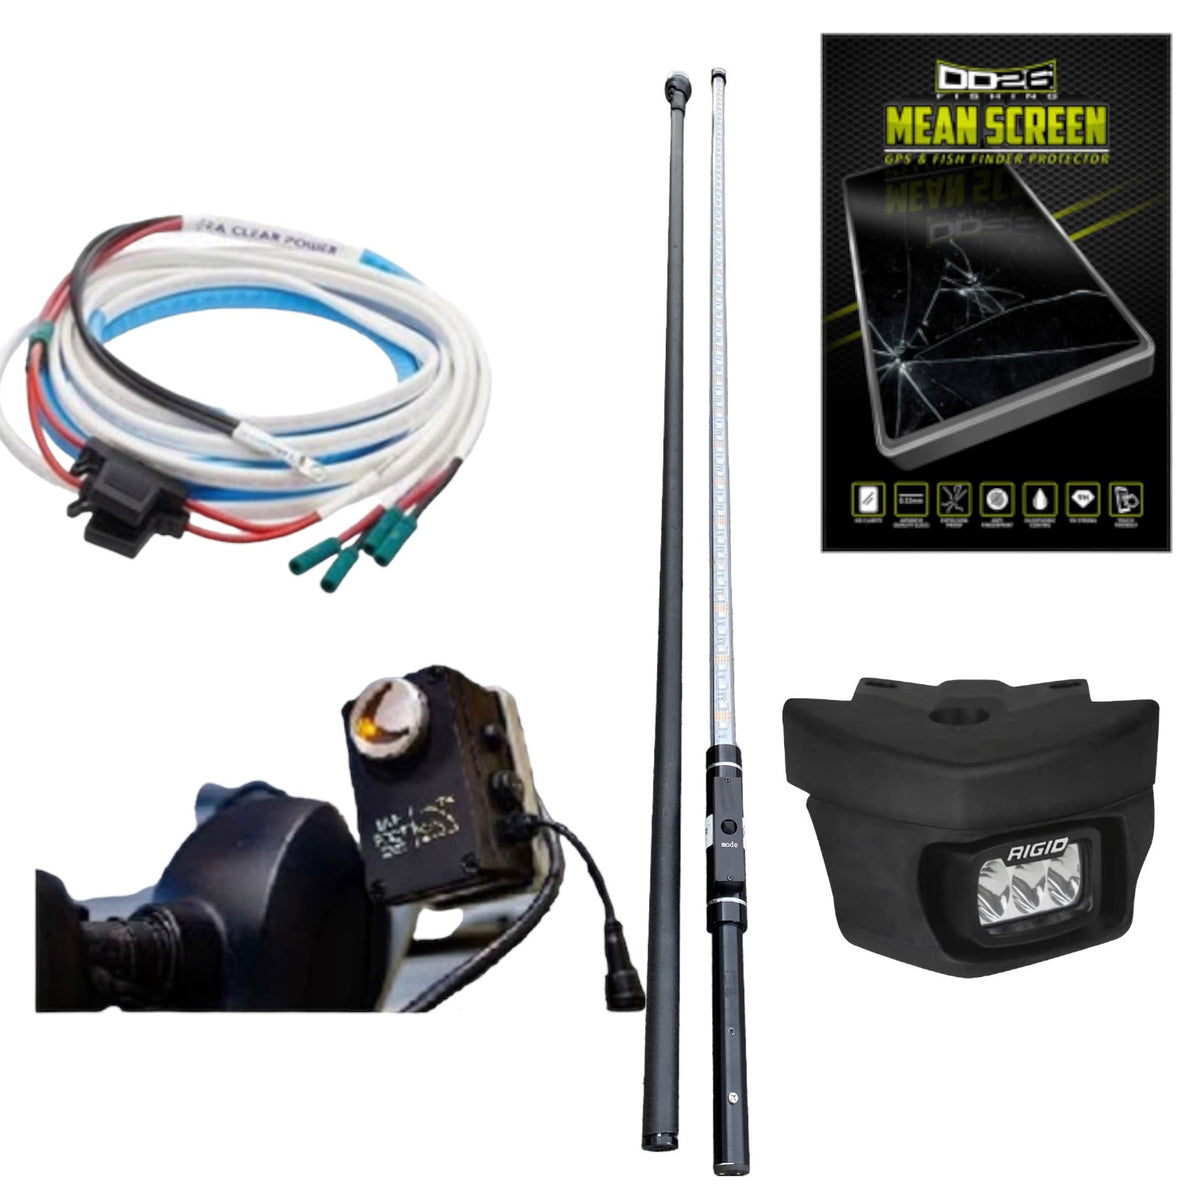 Electronic Accessories, Lights and Live Foot – DD26 Fishing